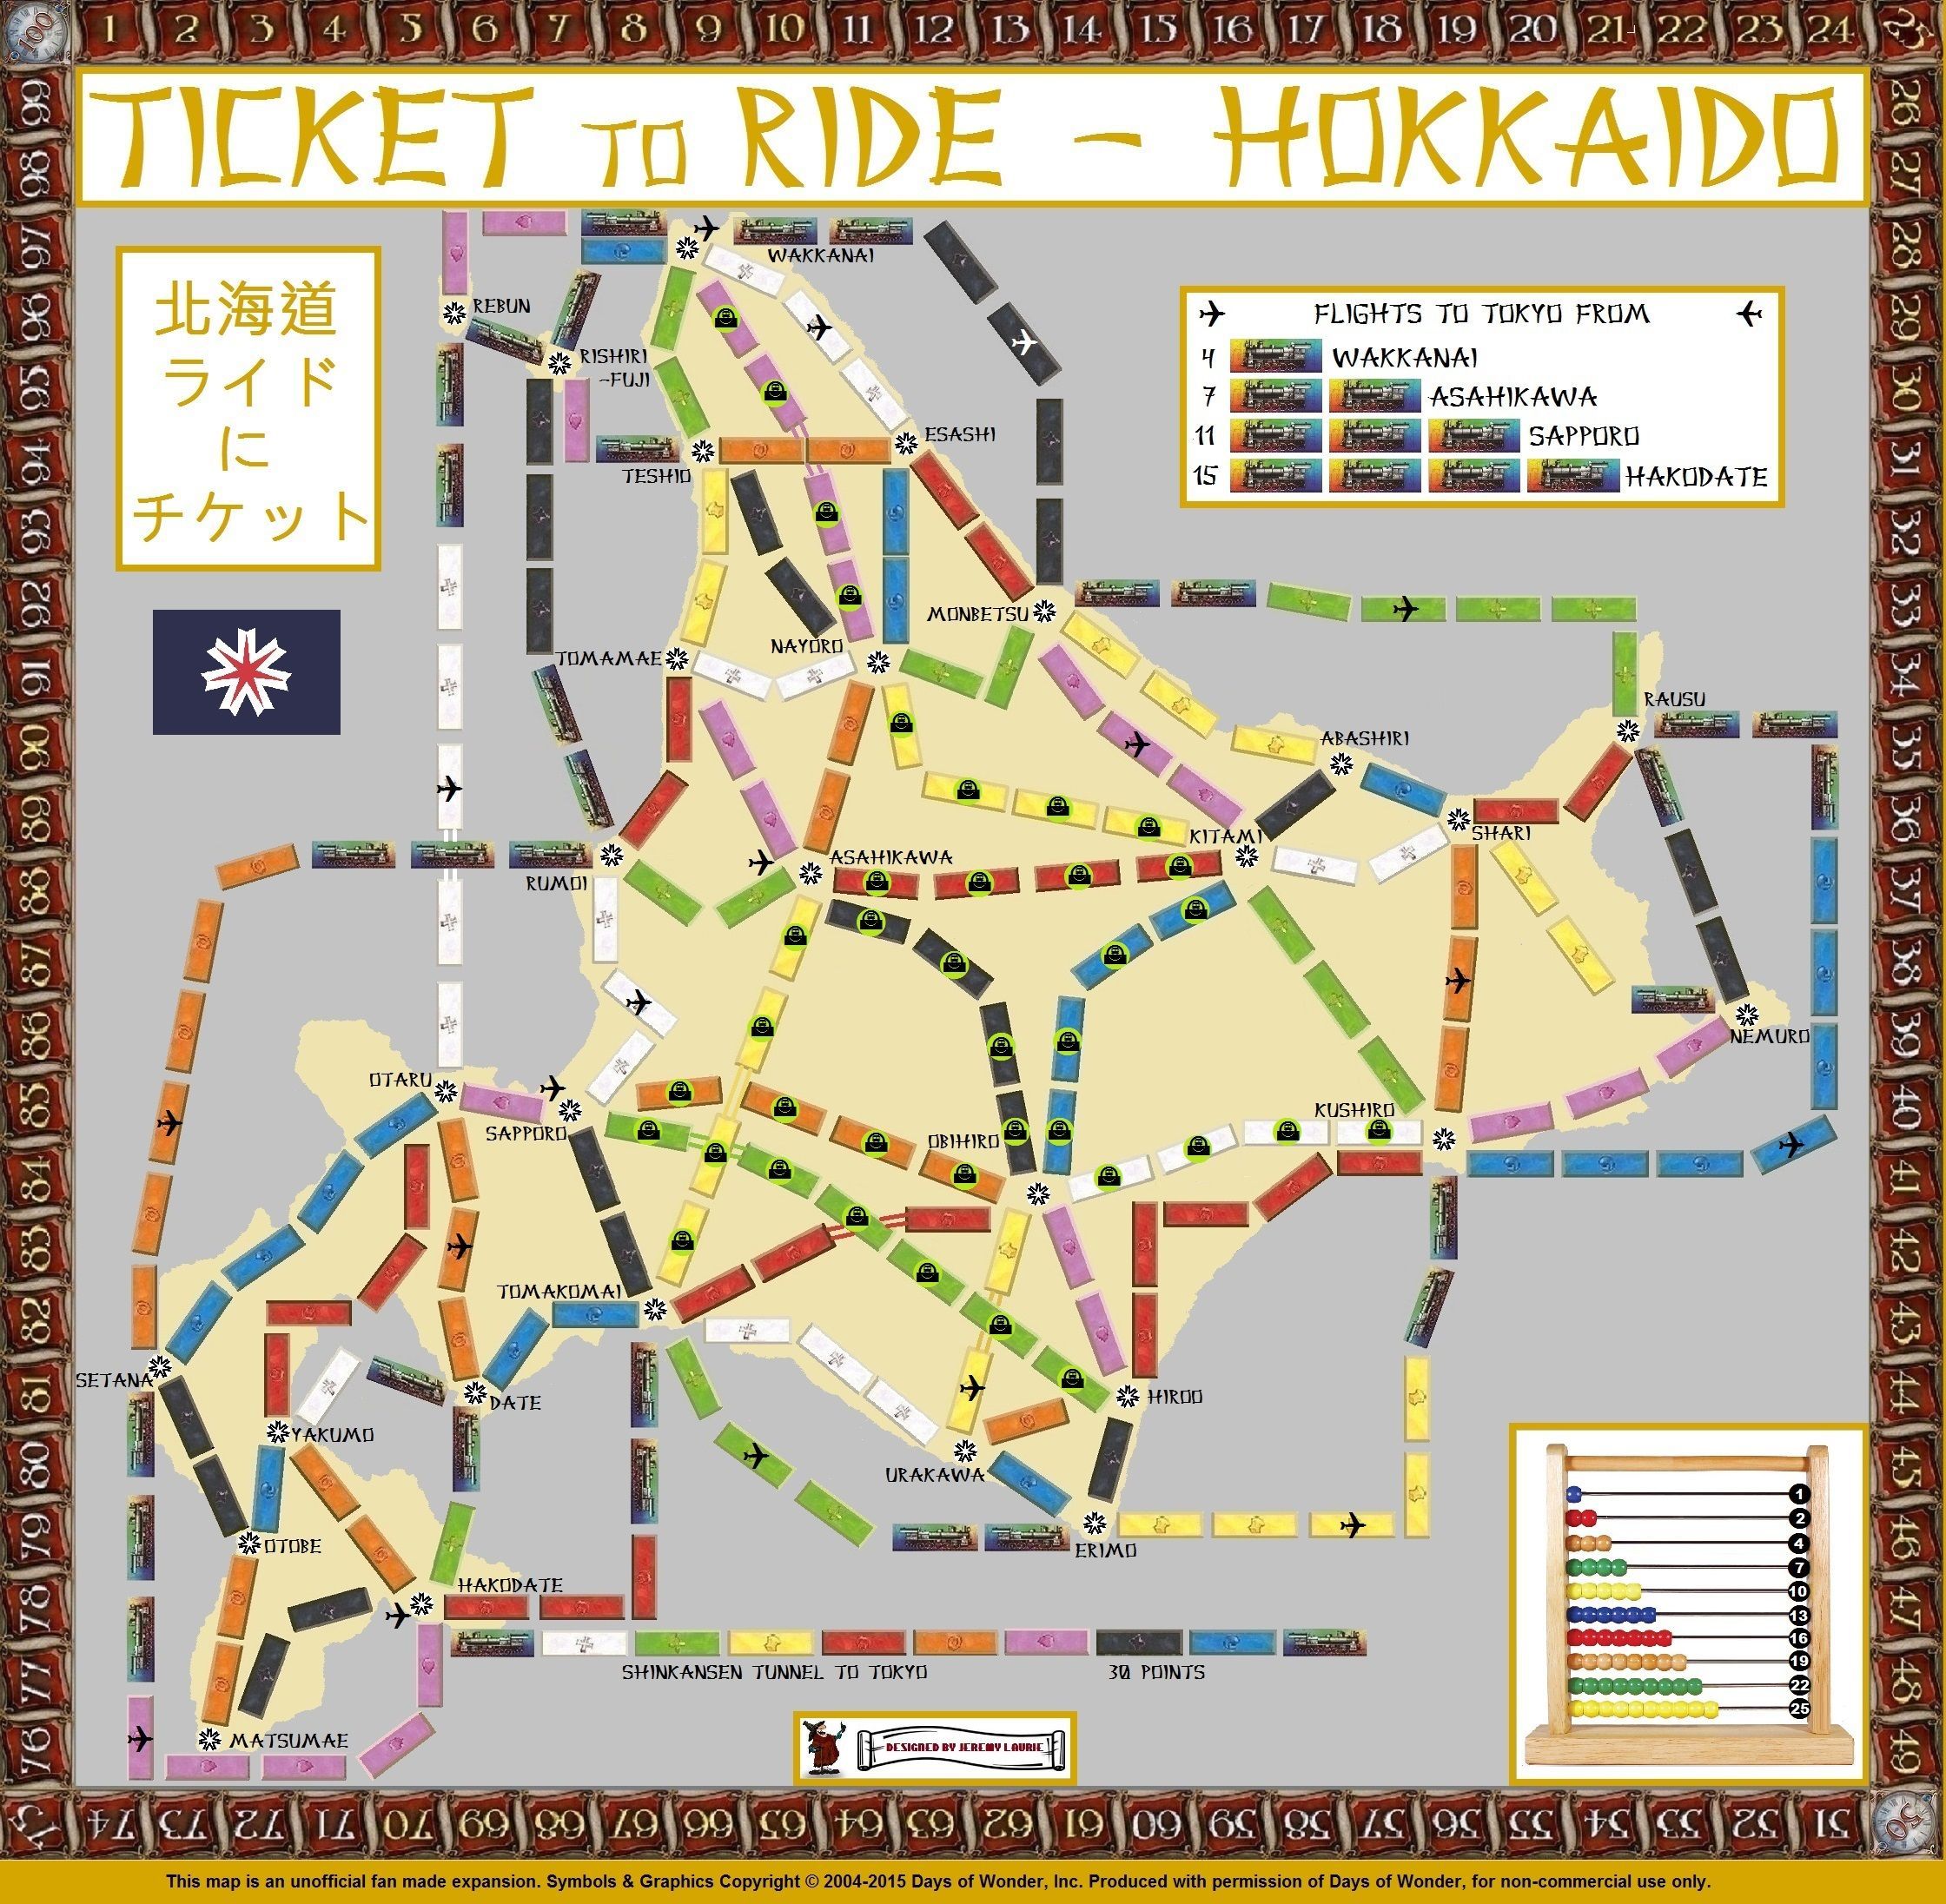 Hokkaido (fan expansion for Ticket to Ride)